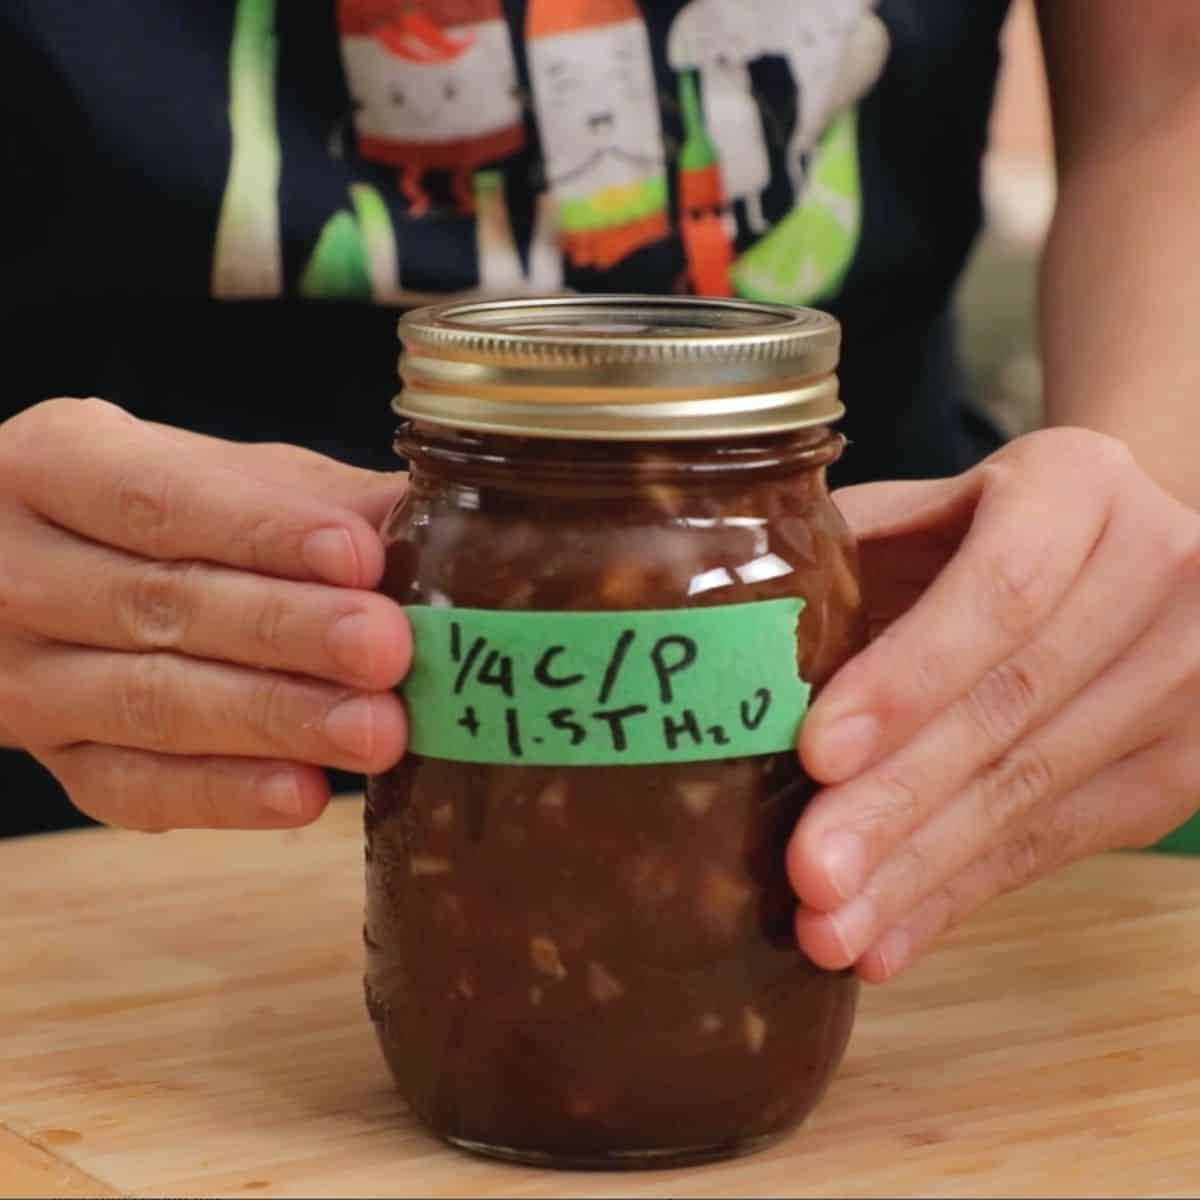 A mason jar of pad thai sauce with masking tape on it labelled "¼ c/p + 1.5 T H2O"